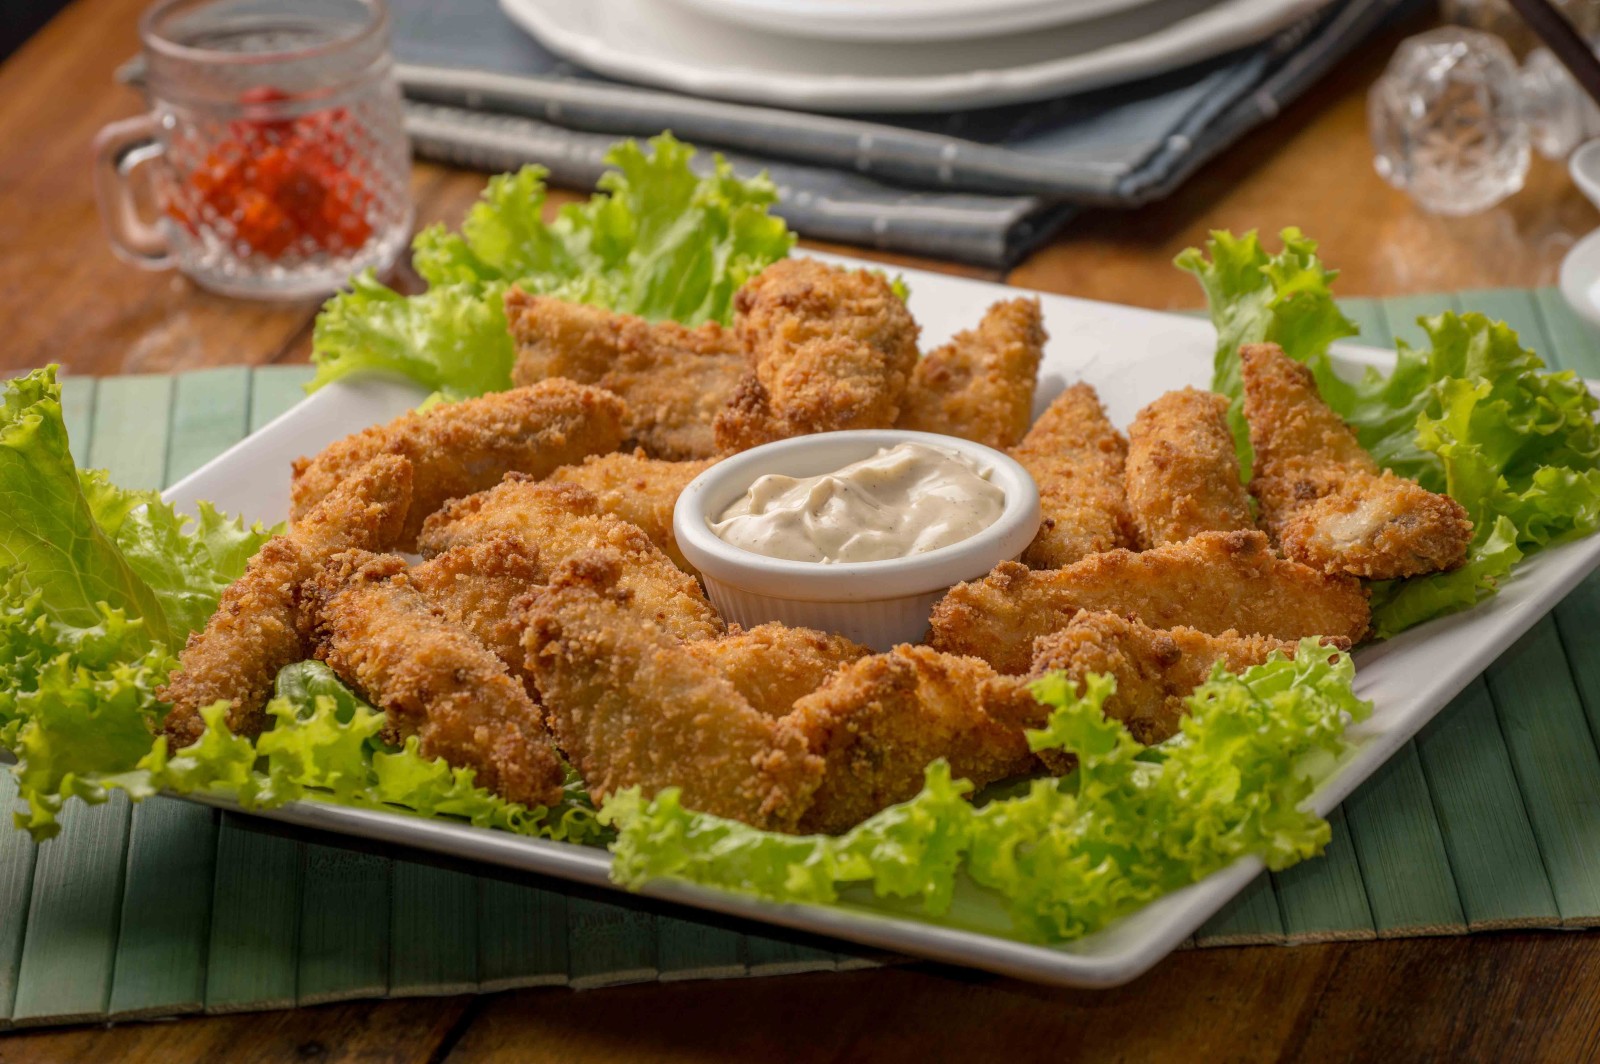 Tan chicken fingers with green lettuce on a white plate and white sauce in the center in Madeira, Portugal.